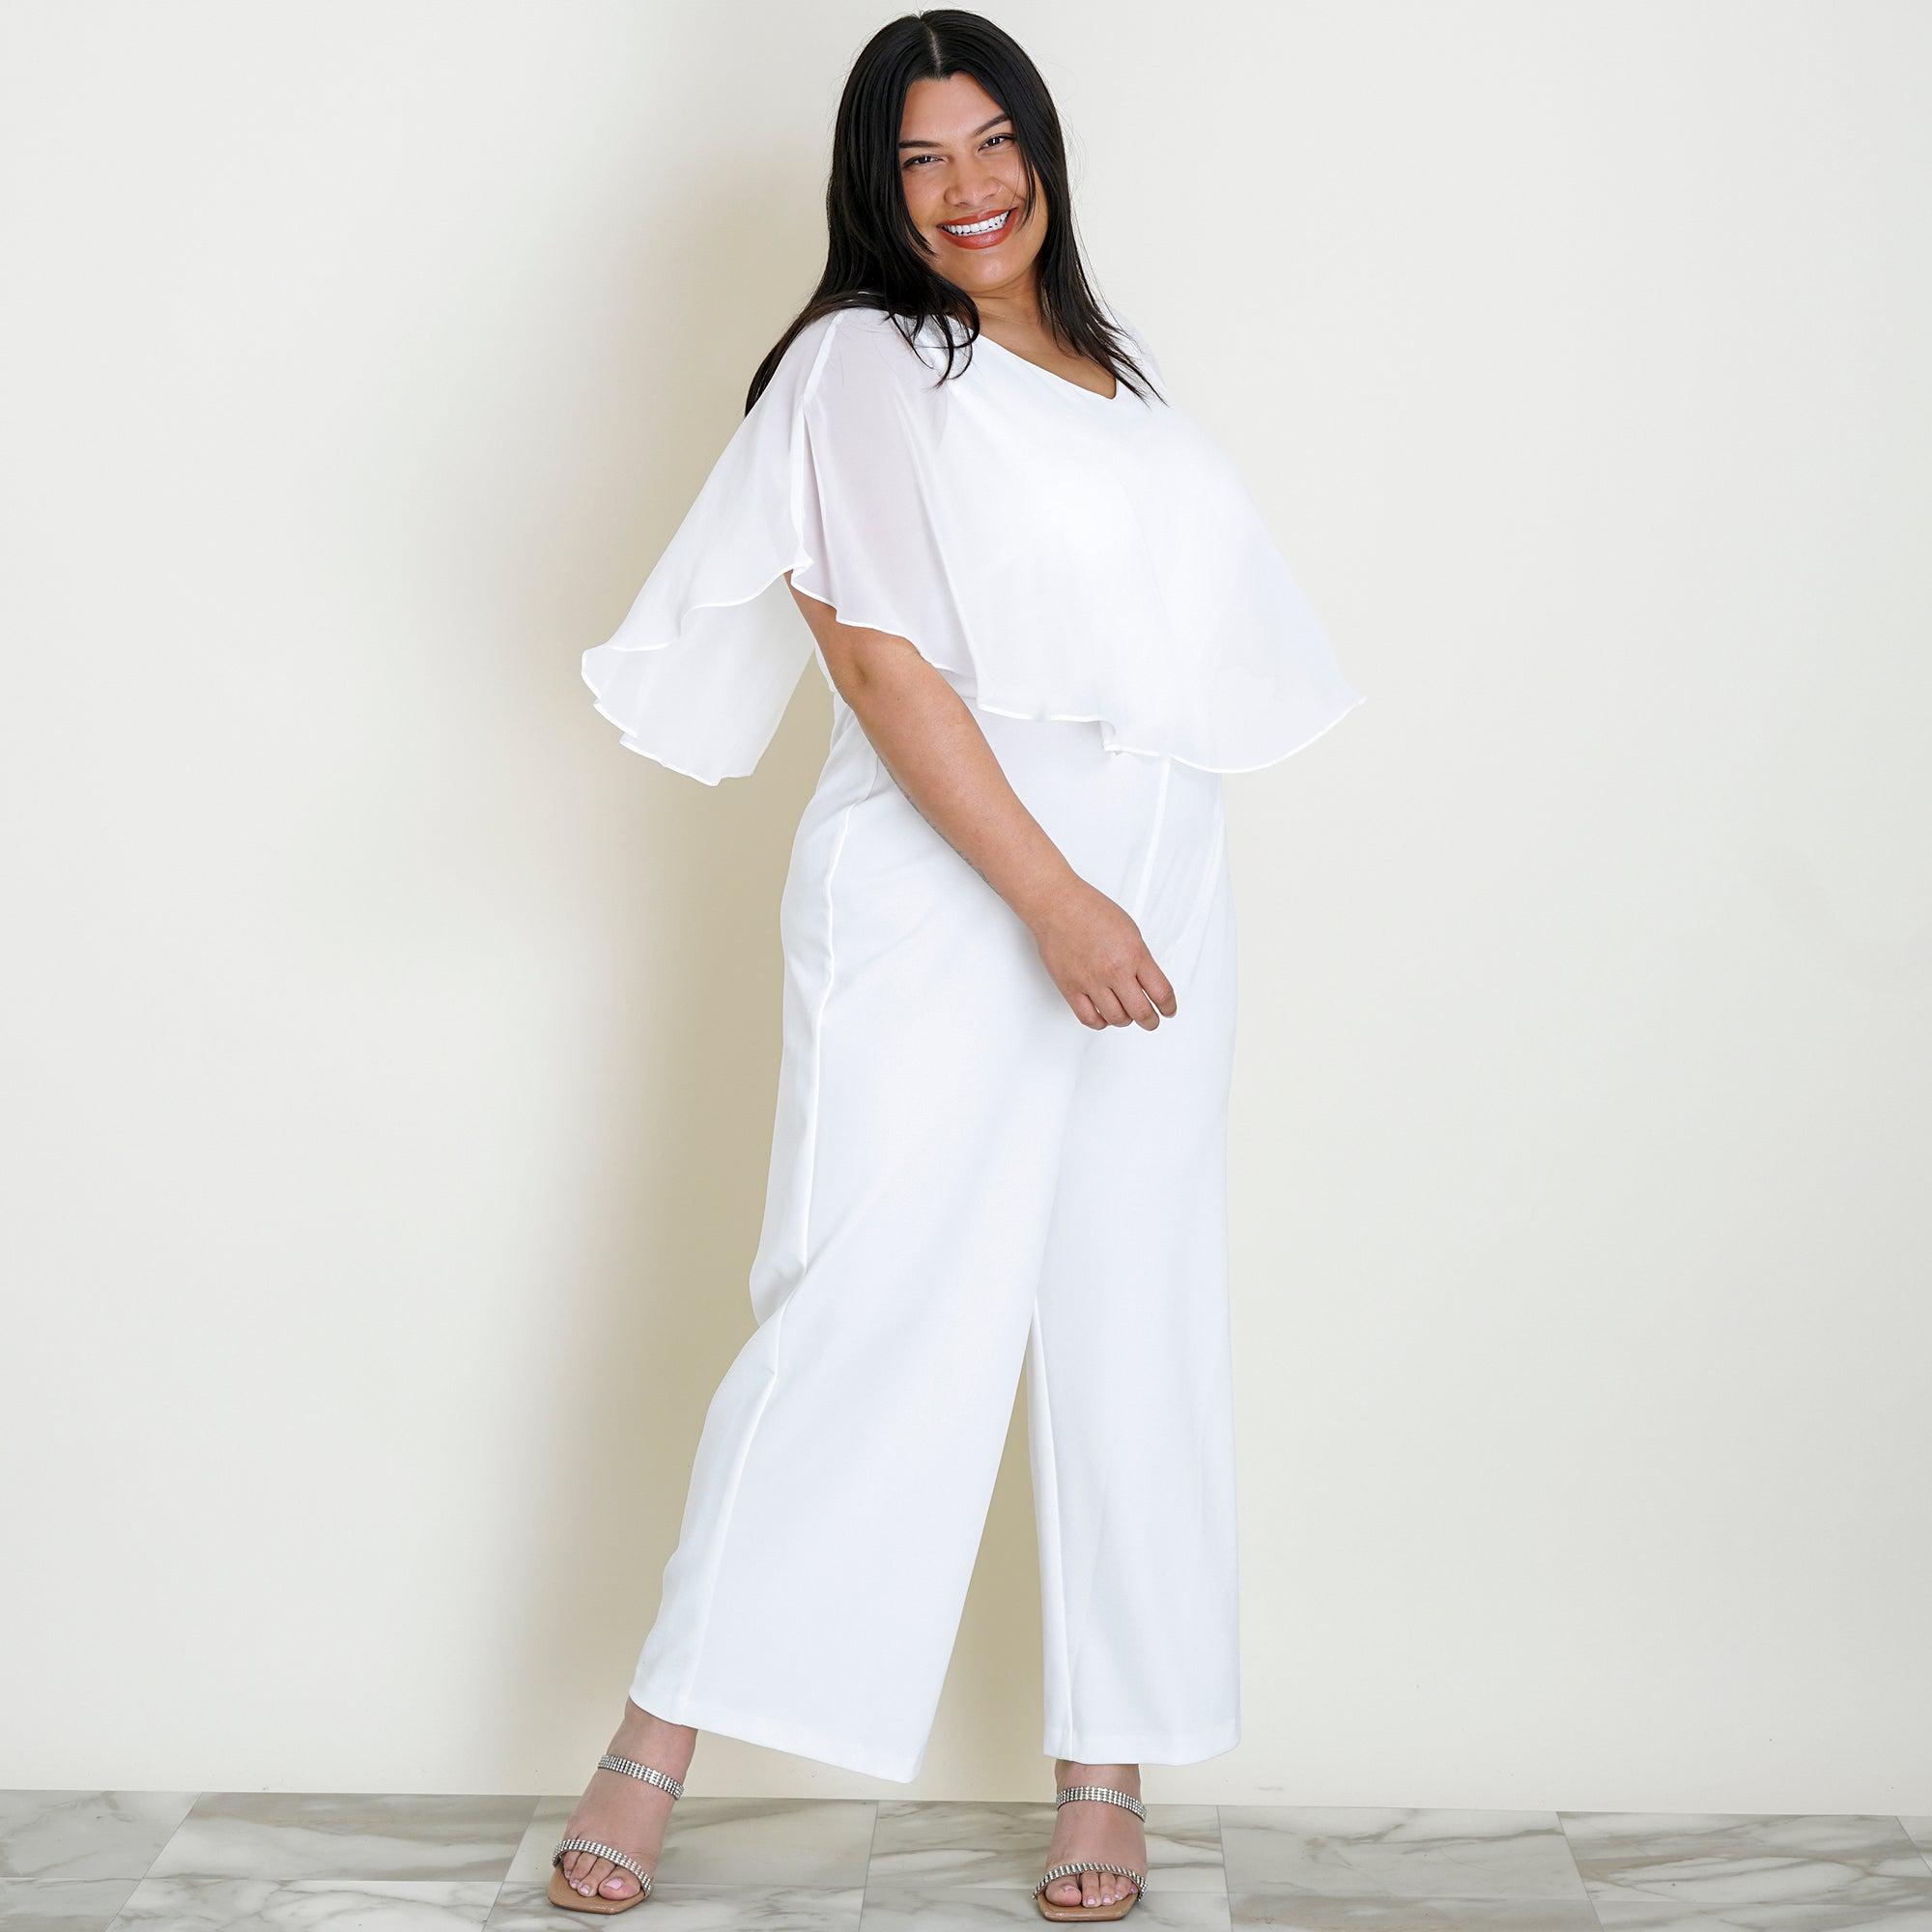 Woman posing wearing Ivory Sunny 2.0 Chiffon Capelet Ivory Jumpsuit from Connected Apparel